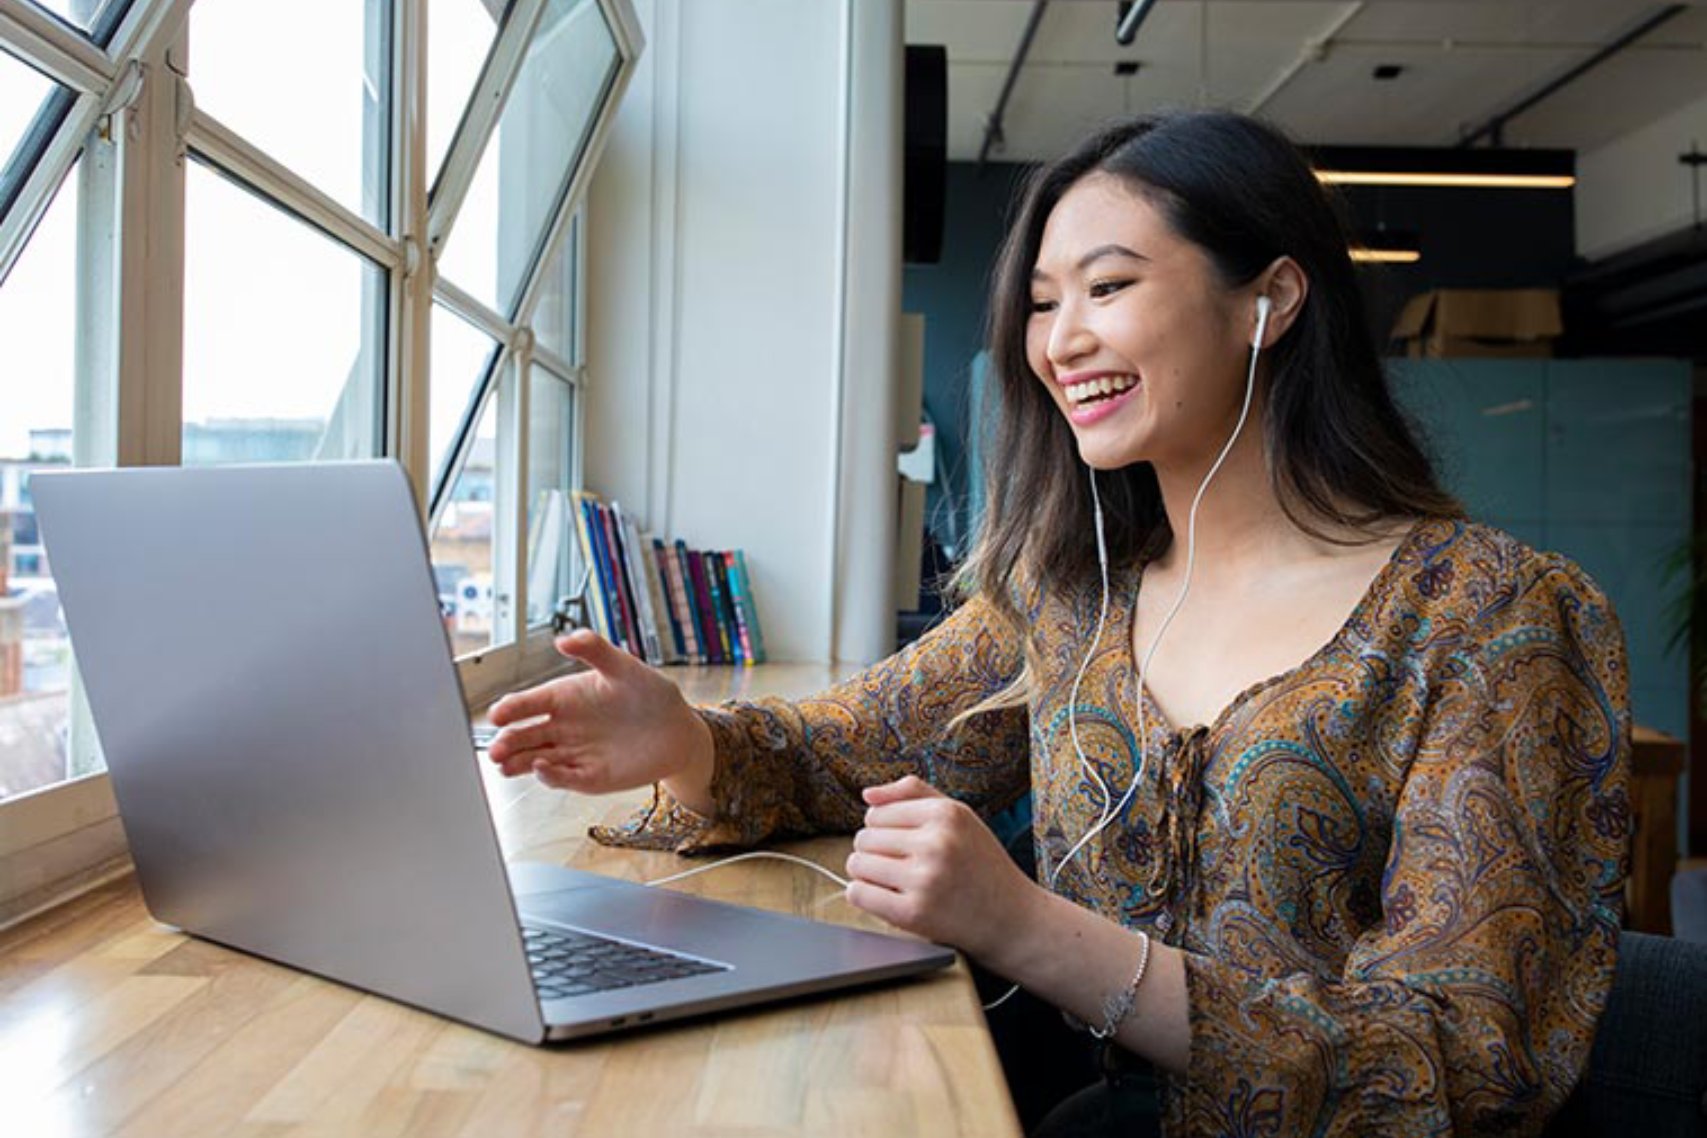 Woman smiling in front of laptop